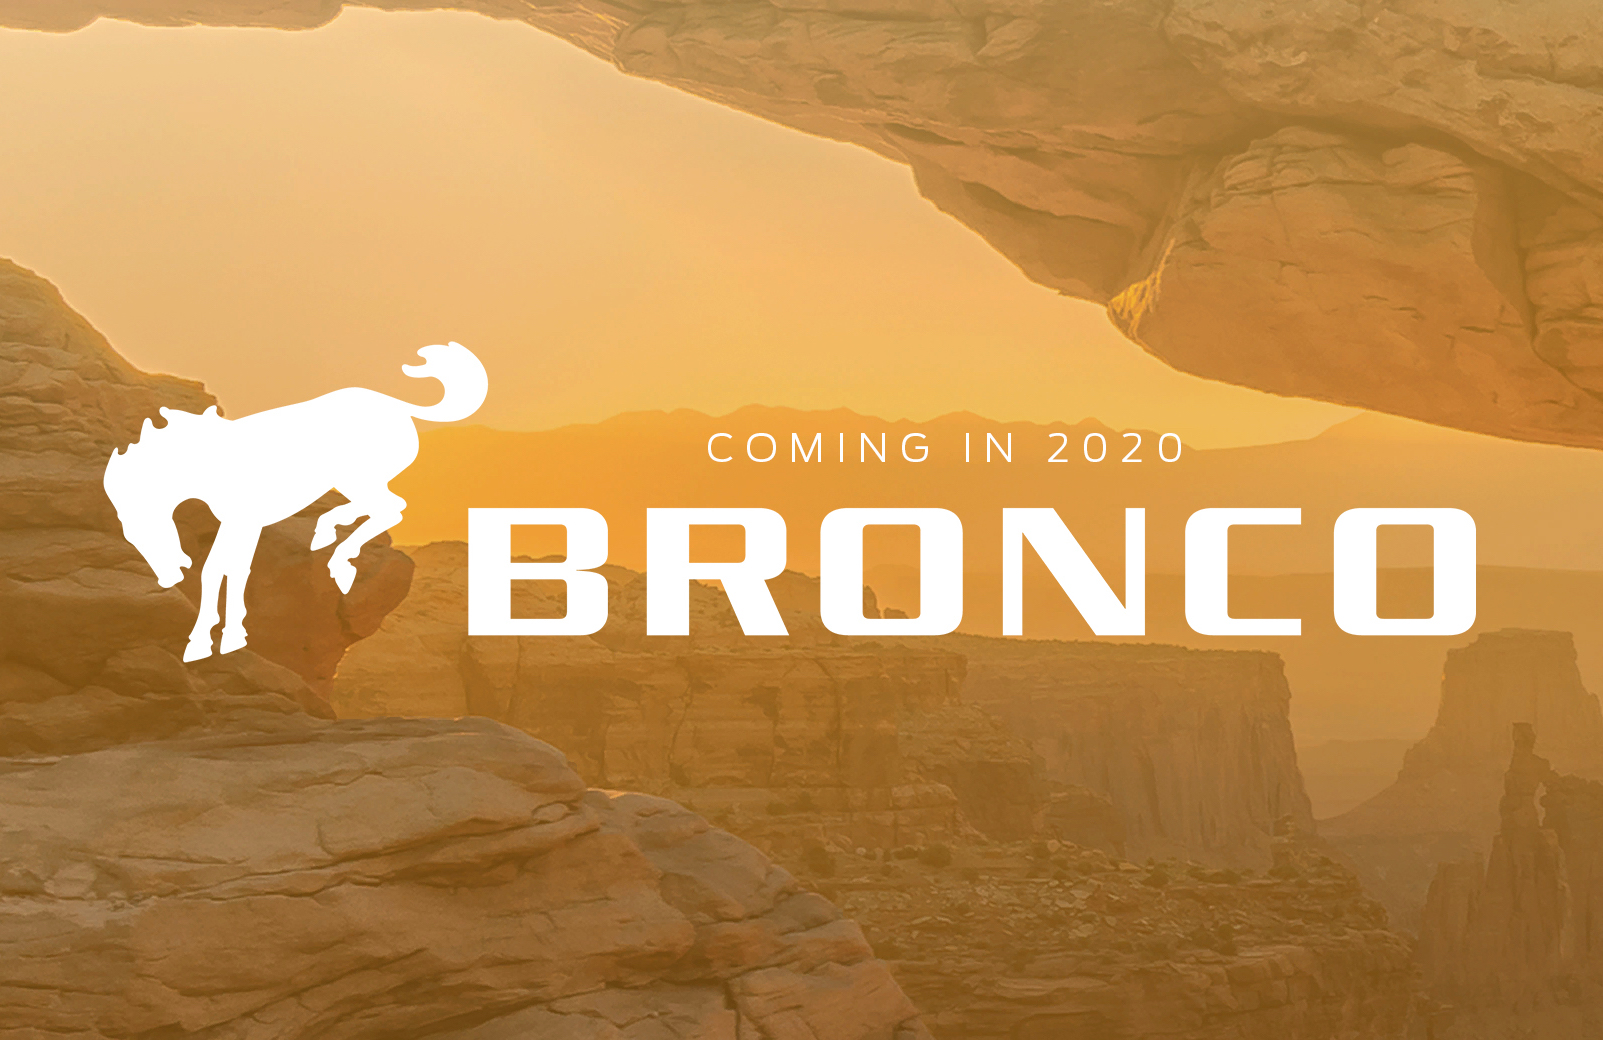 New Ford Bronco officially confirmed for 2020